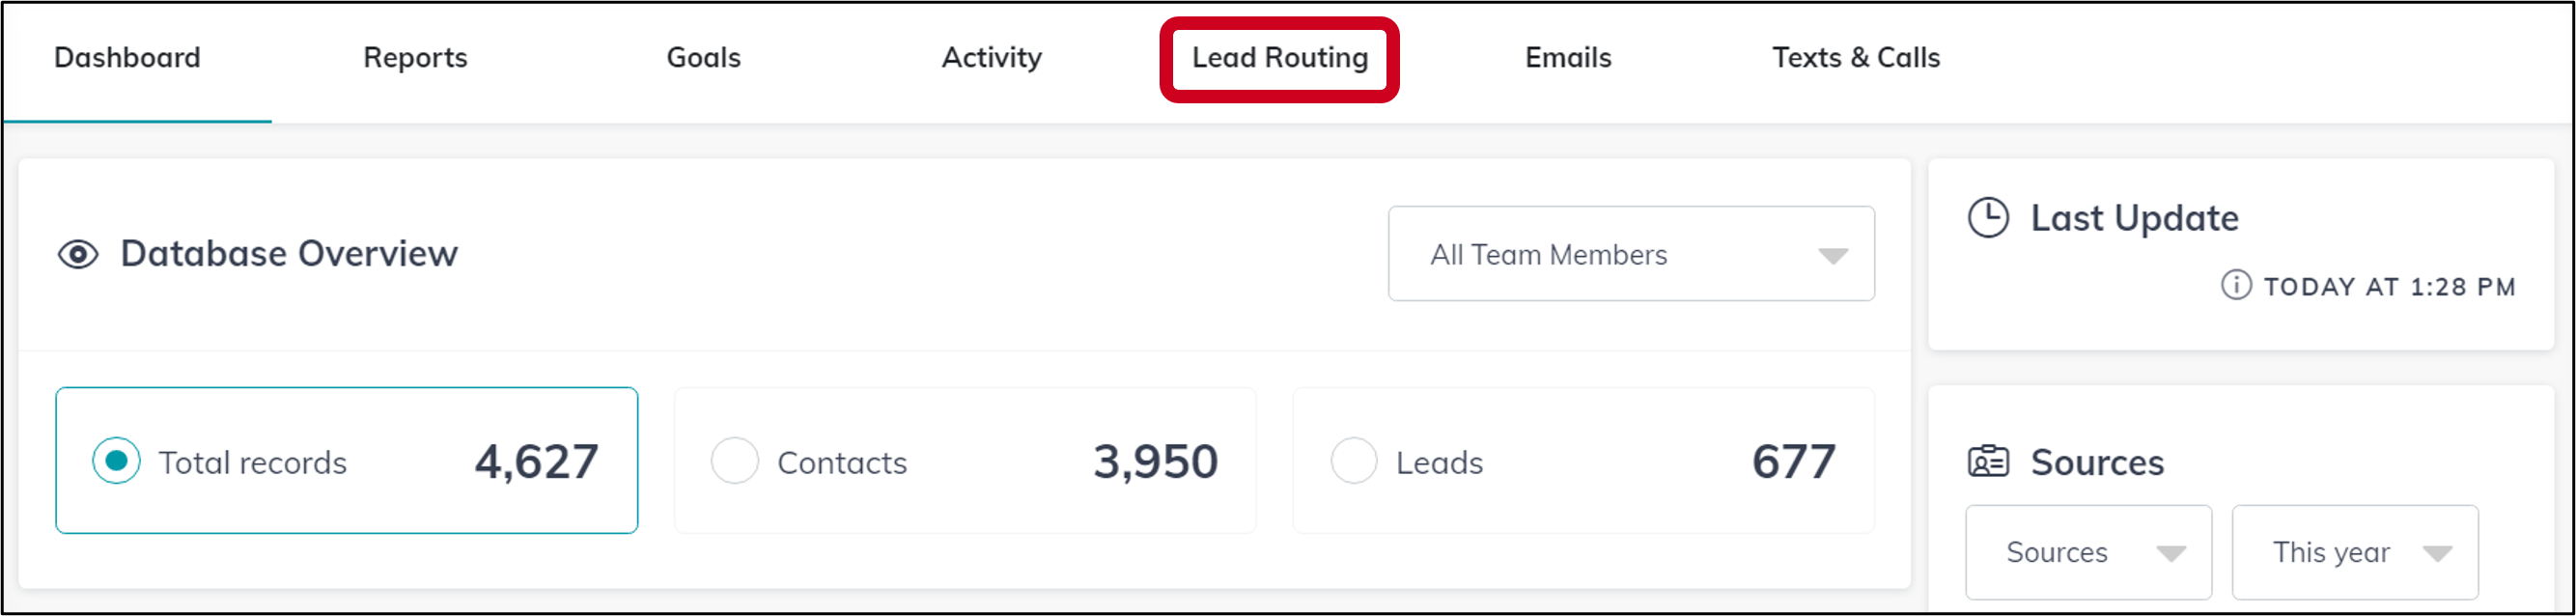 teams_reports_lead_routing_tab.png